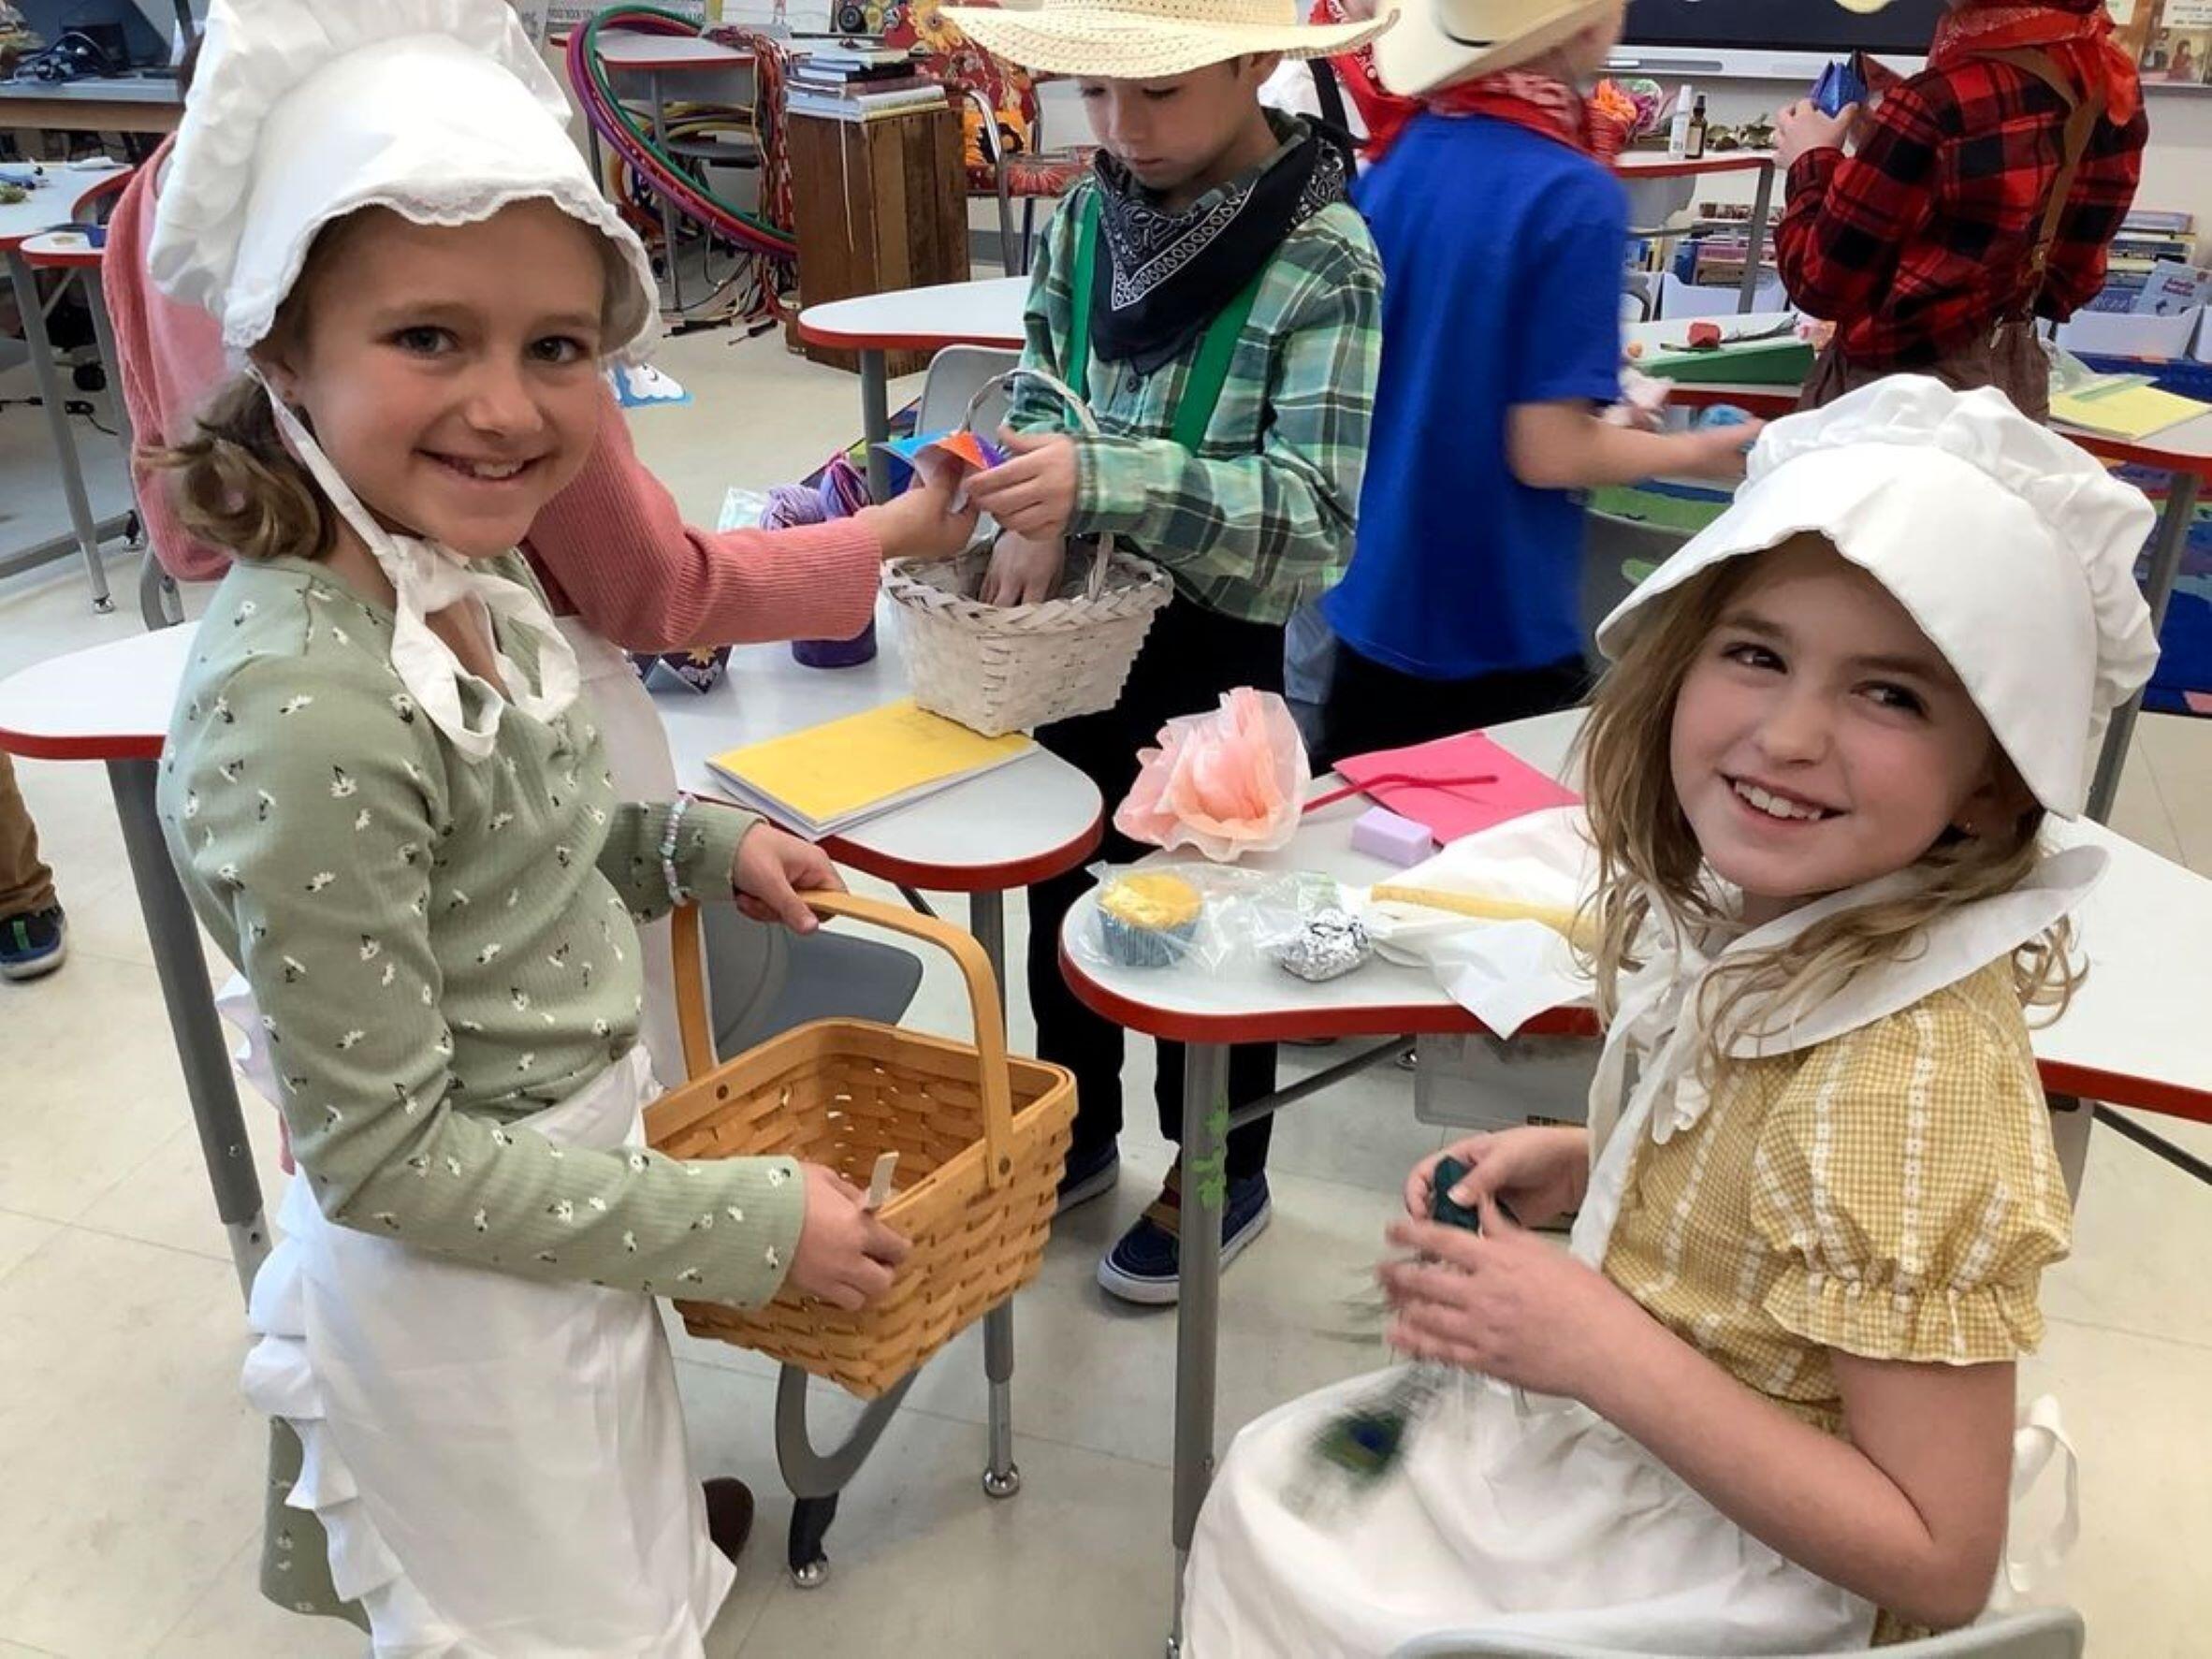 2 female students with bonnets on their heads and aprons on. One is holding a basket the other one has something green in her hands. In the background is a boy wearing a flannel shirt, bandana around his neck and a woven hat. He has his right hand inside of a basket and the left hand is reaching for something that another student who is not visible is holding out.